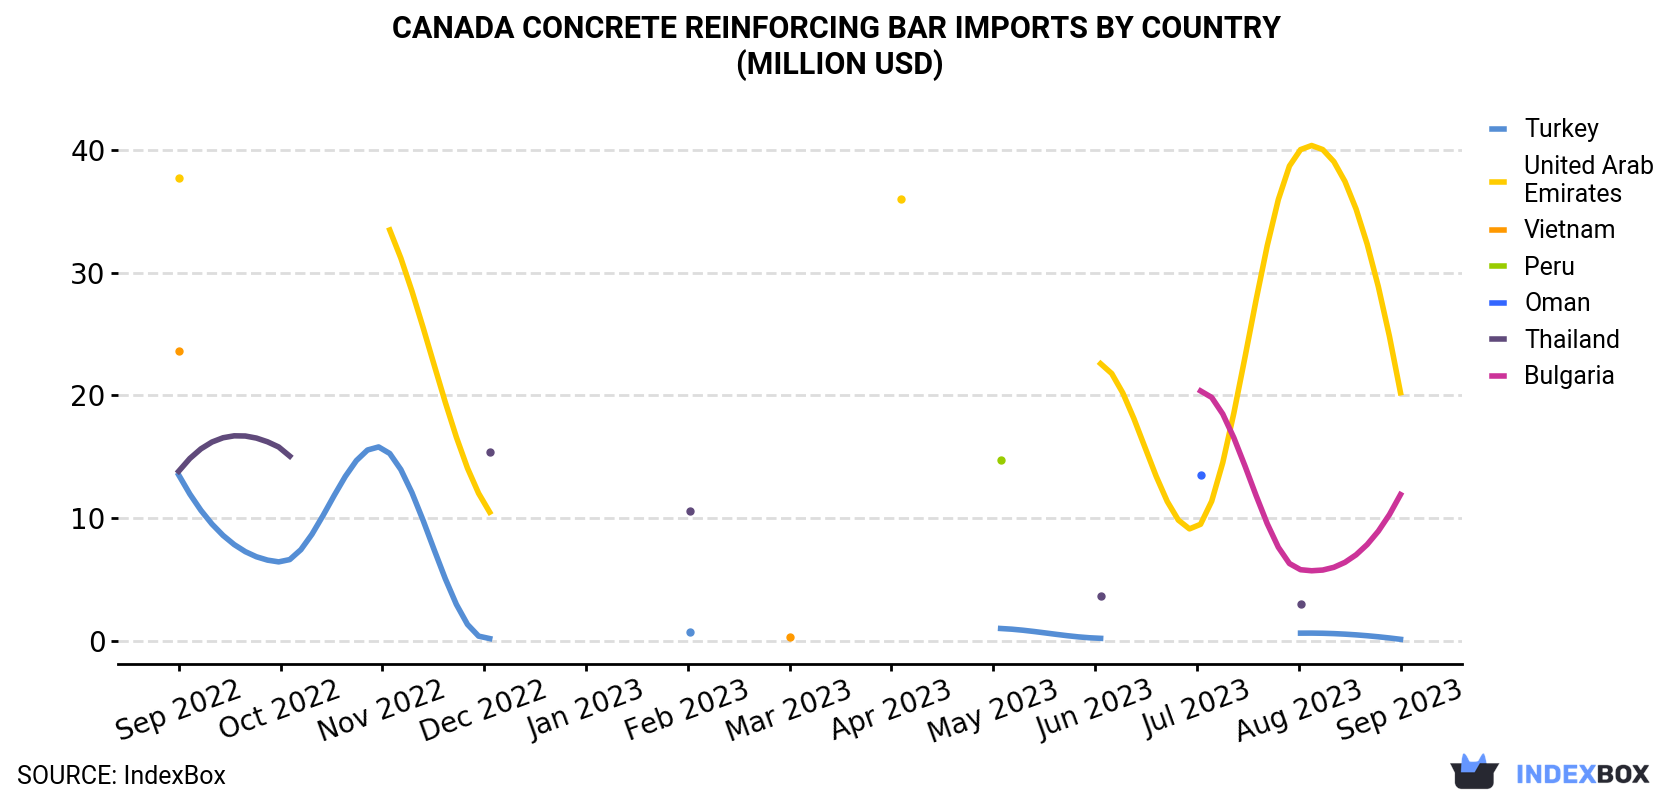 Canada Concrete Reinforcing Bar Imports By Country (Million USD)